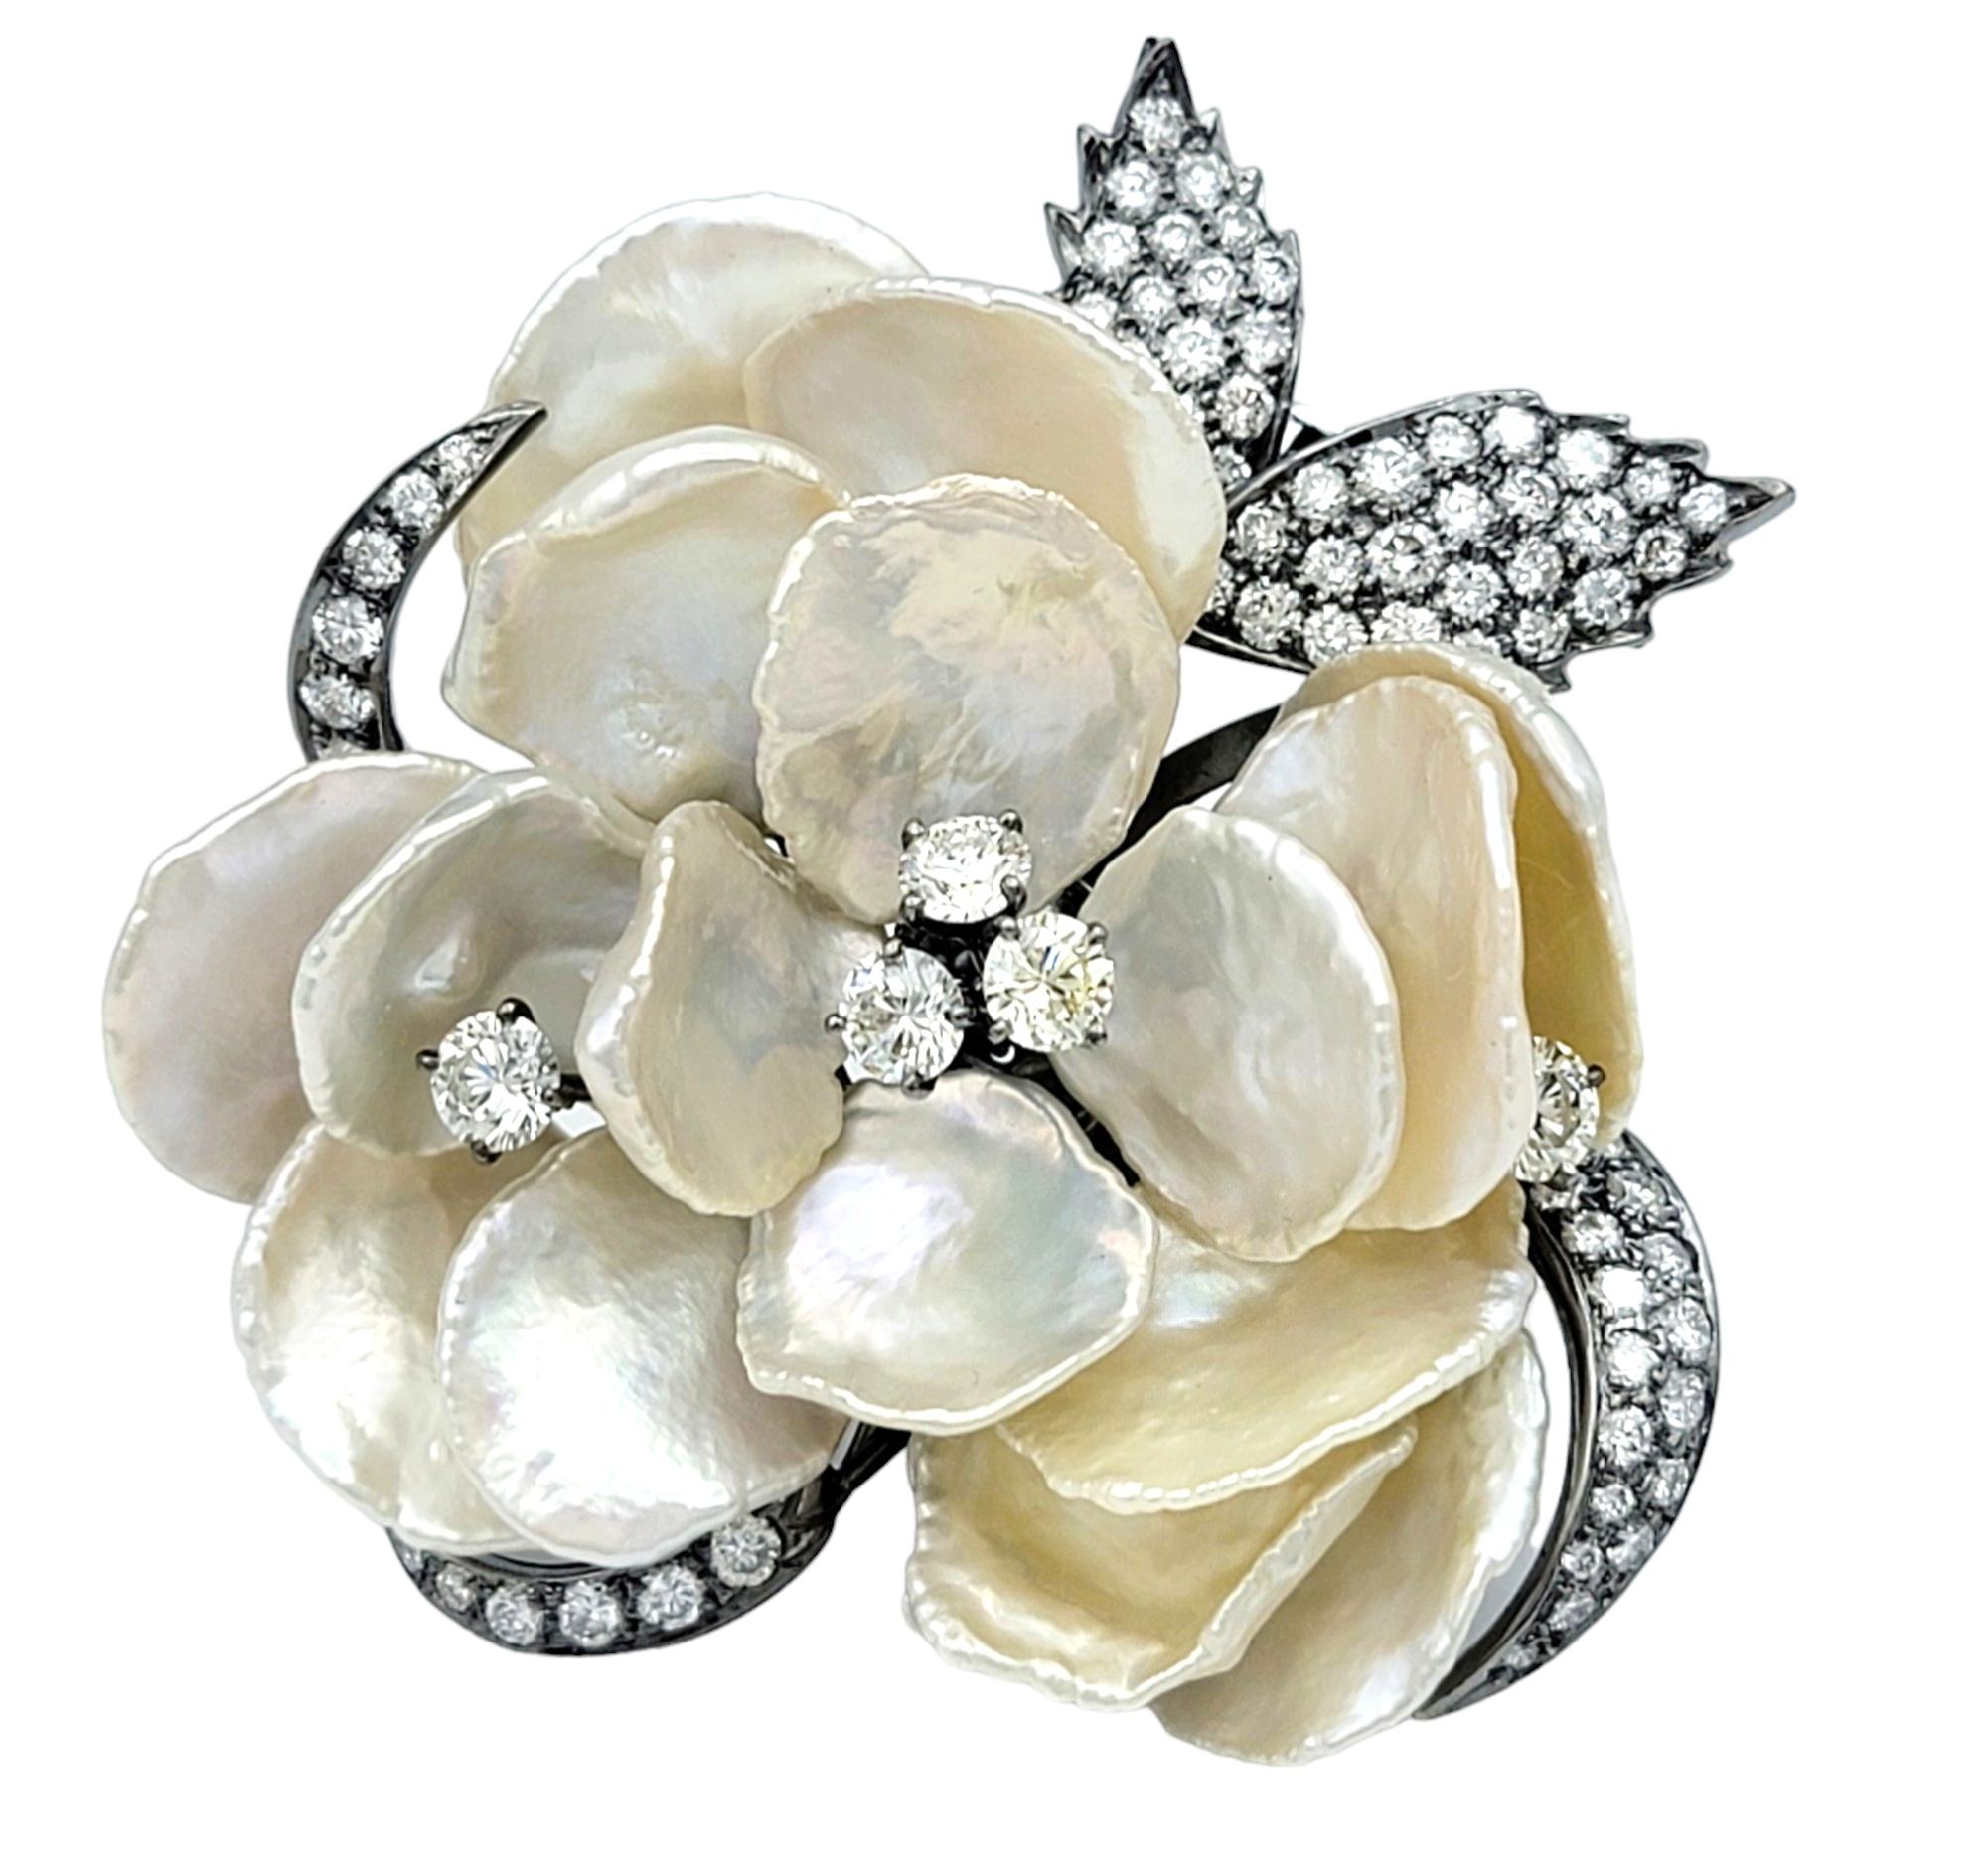 This stunning flower brooch features delicate petals crafted from lustrous mother of pearl, set in 18 karat white gold with black rhodium for a striking contrast. The leaves are adorned with sparkling diamonds, adding a touch of glamour and